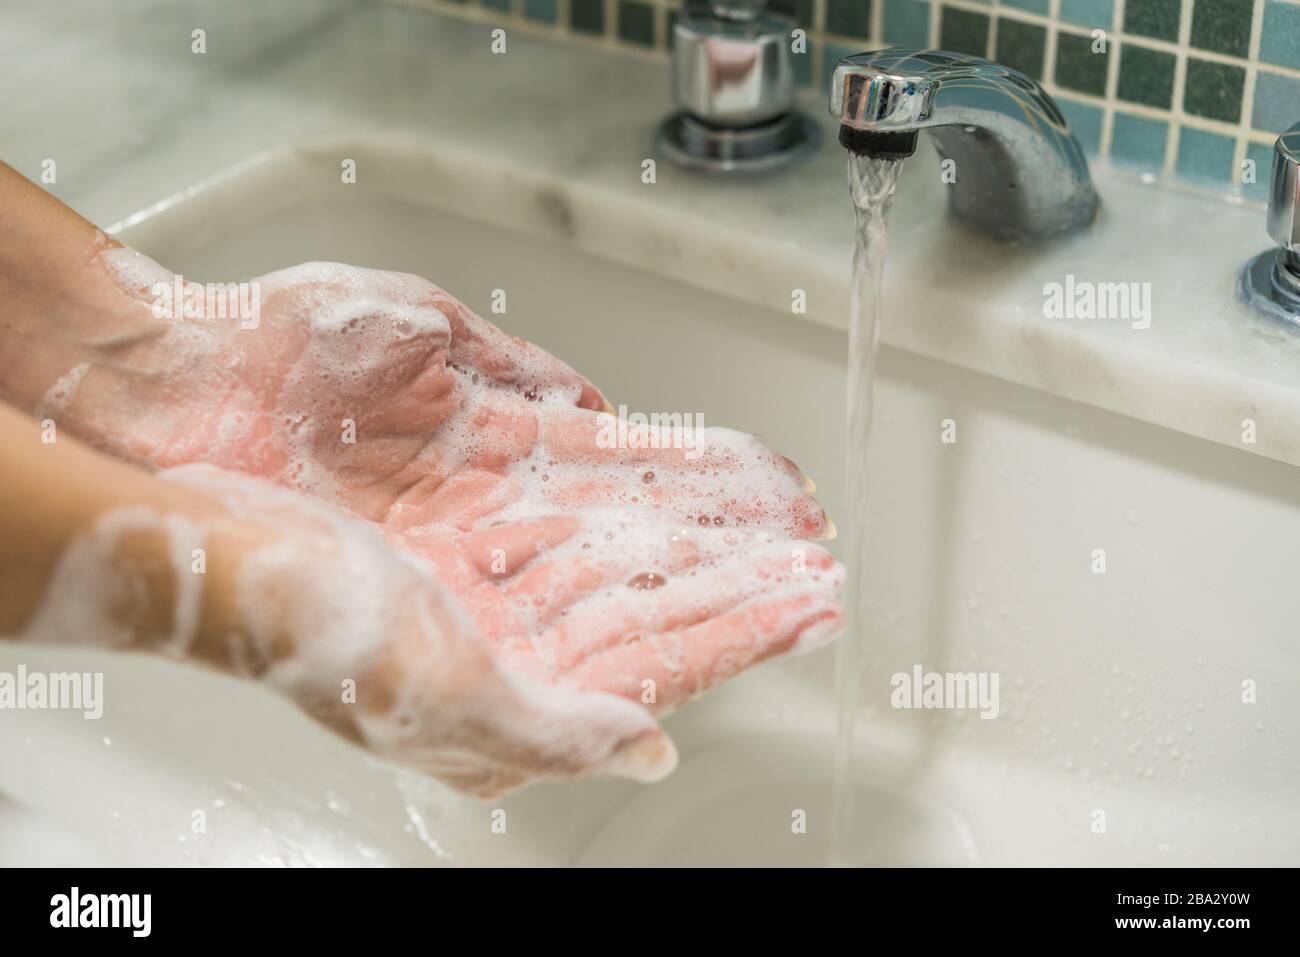 Washing hands with disinfectant soap for prevention of coronavirus. Stock Photo